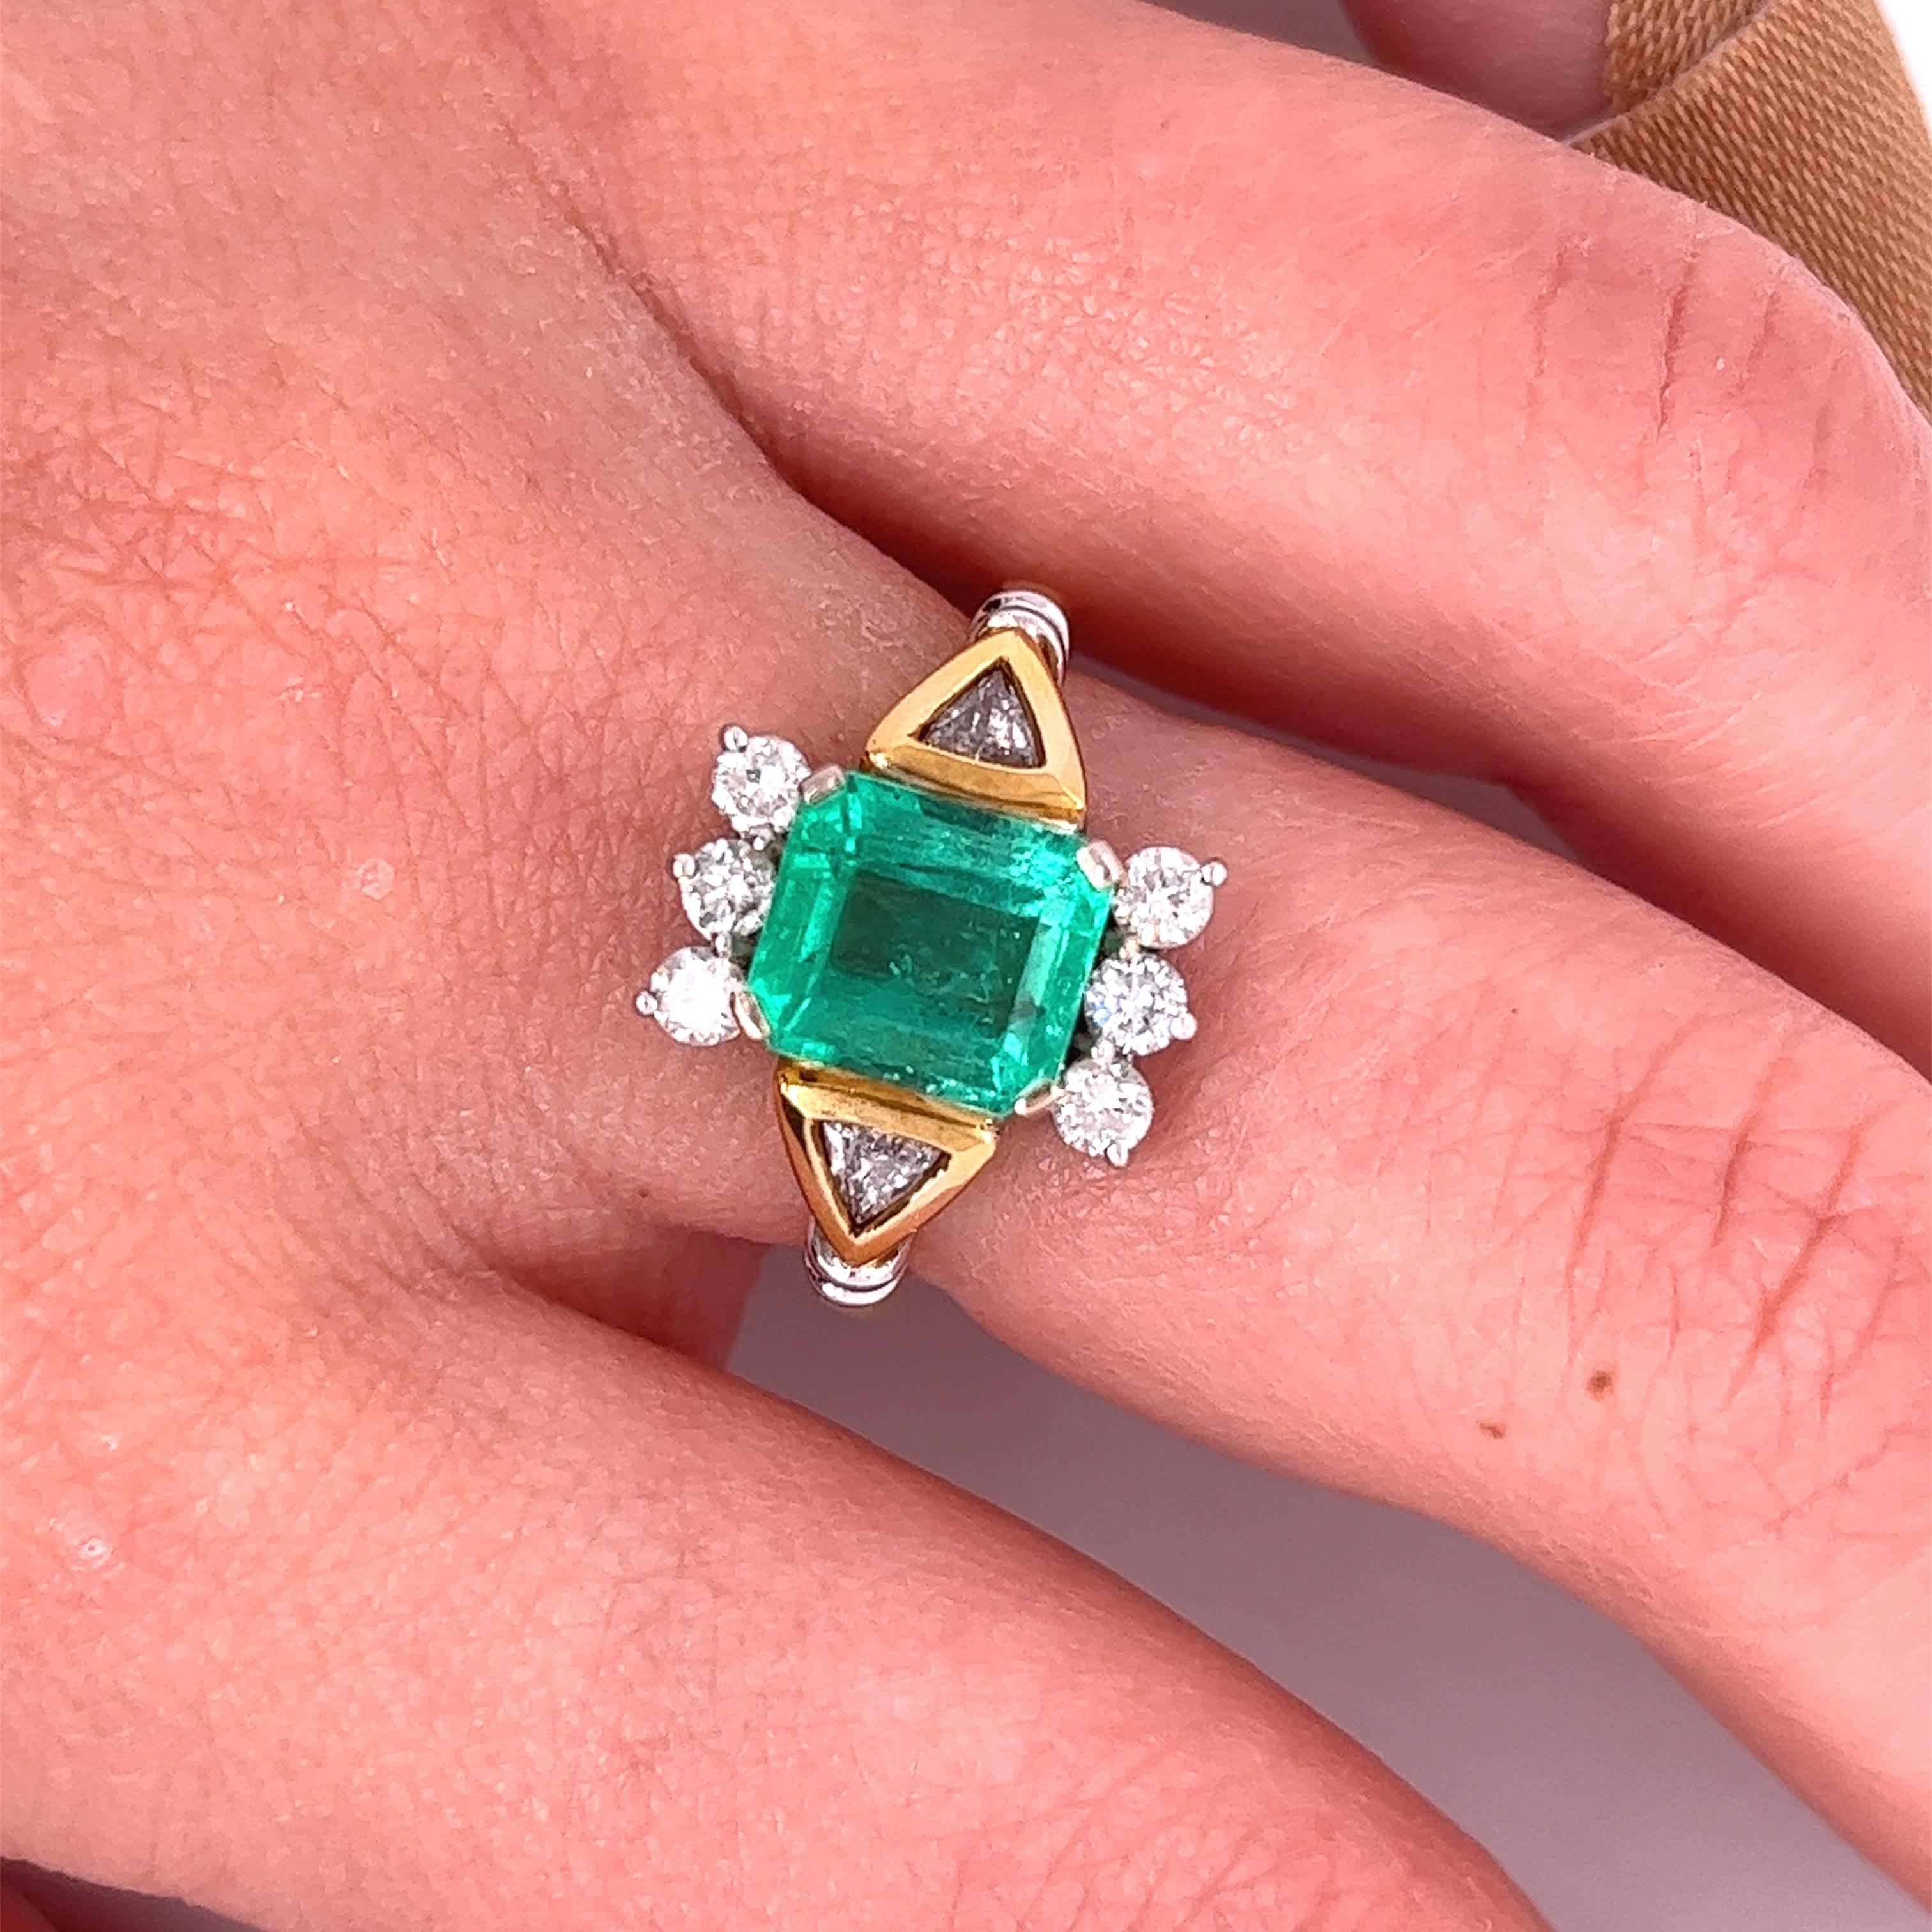 2.77-carat Emerald-cut Colombian Emerald mounted in 18k solid yellow gold ring setting with trillion-cut diamond accents. A superb quality Emerald with a vivid, 